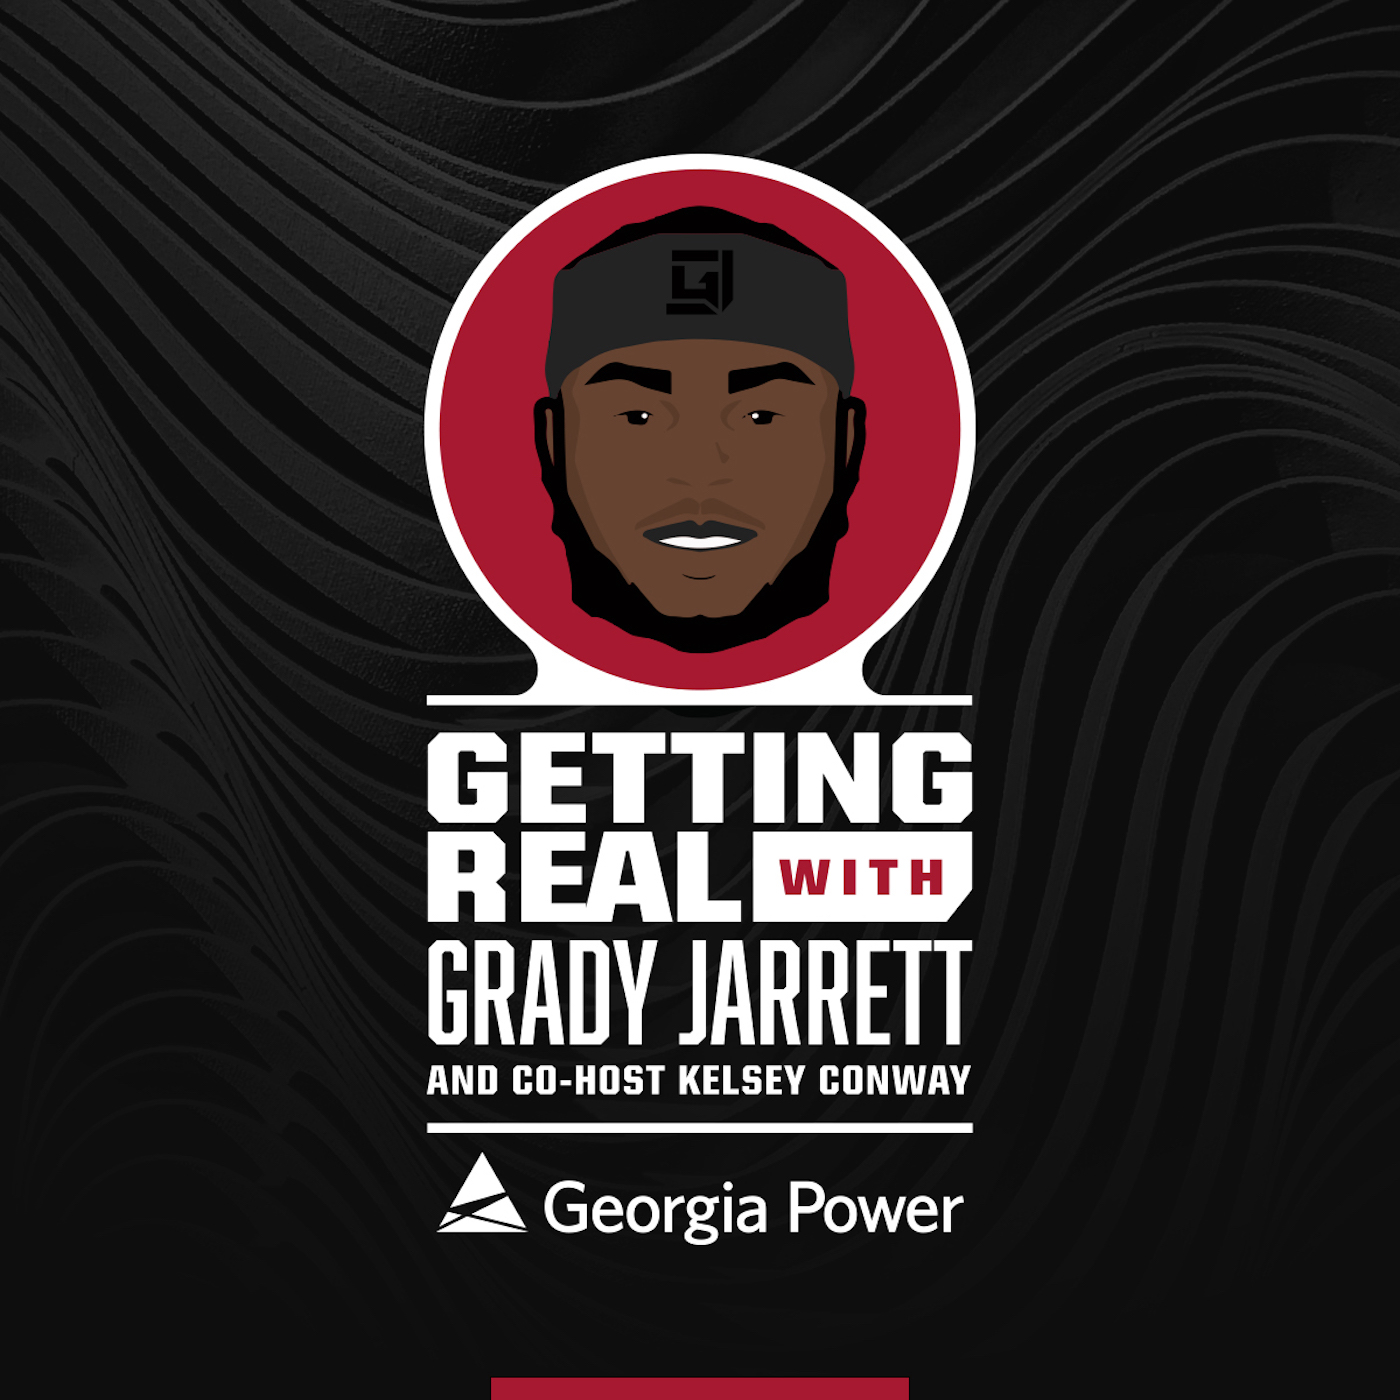 Getting Real with Grady Jarrett Podcast | Dansby Swanson - Atlanta Braves Shortstop joins the mix